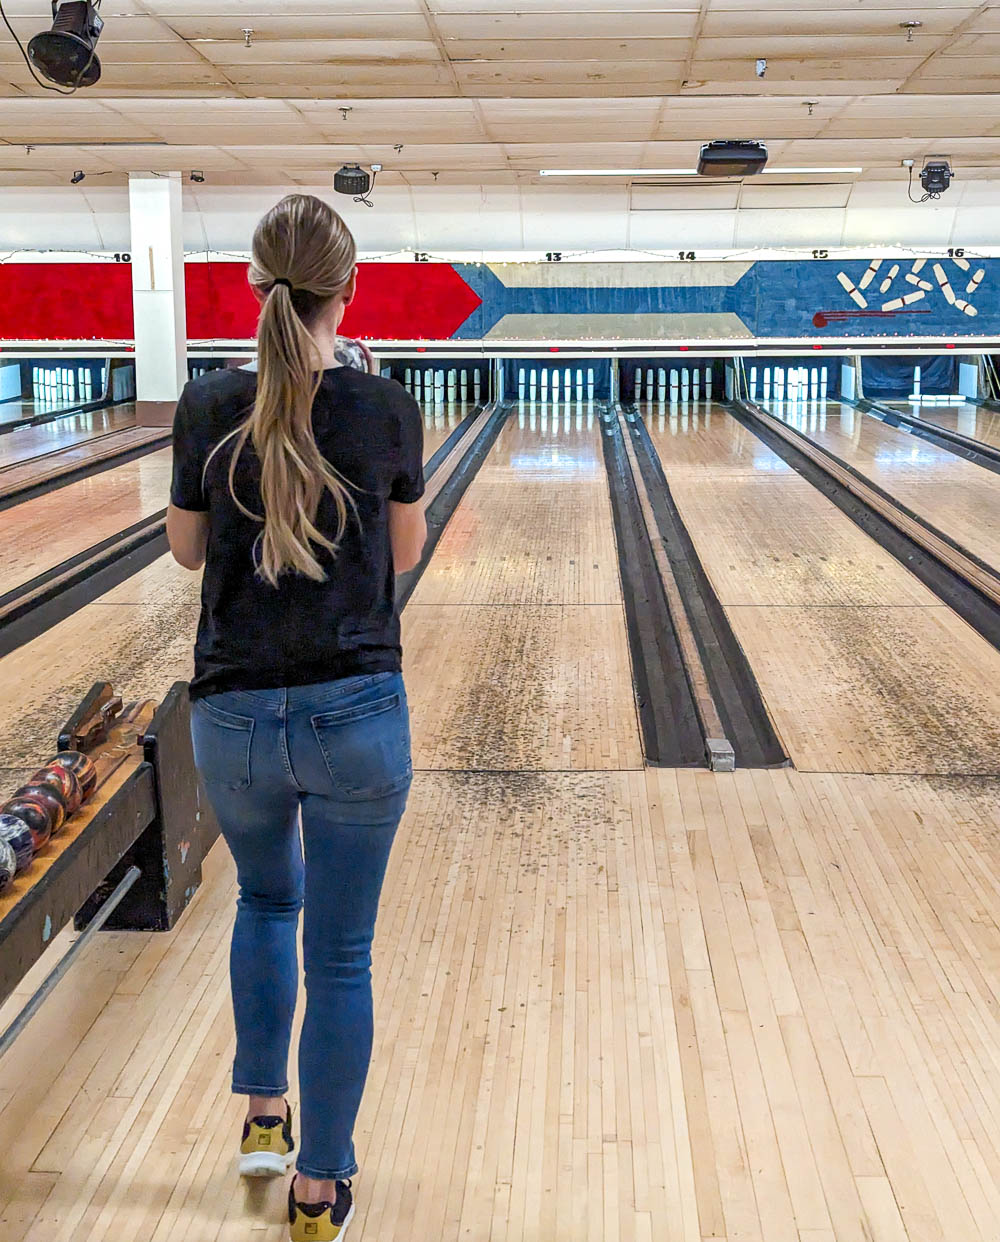 woman in jeans and black tshirt getting ready to roll a ball down a long wooden lane